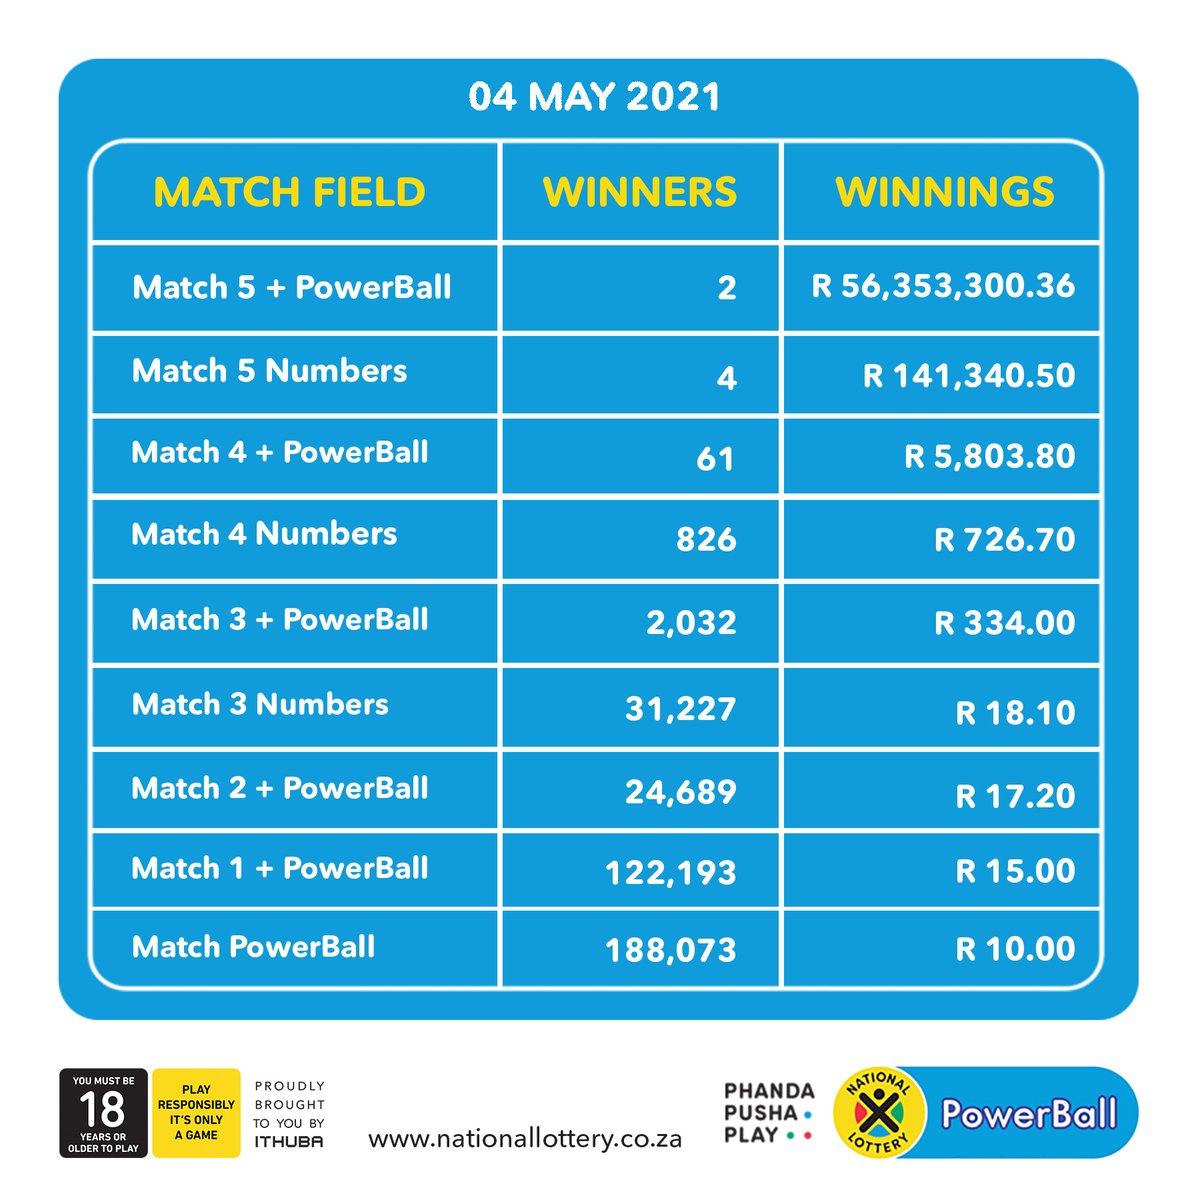 Here are #dividends for the #PowerBall and #PowerBallPLUS draw on 04/05/21
We have two #PowerBall winners of R56,353,300! https://t.co/8A2vuSdY0H